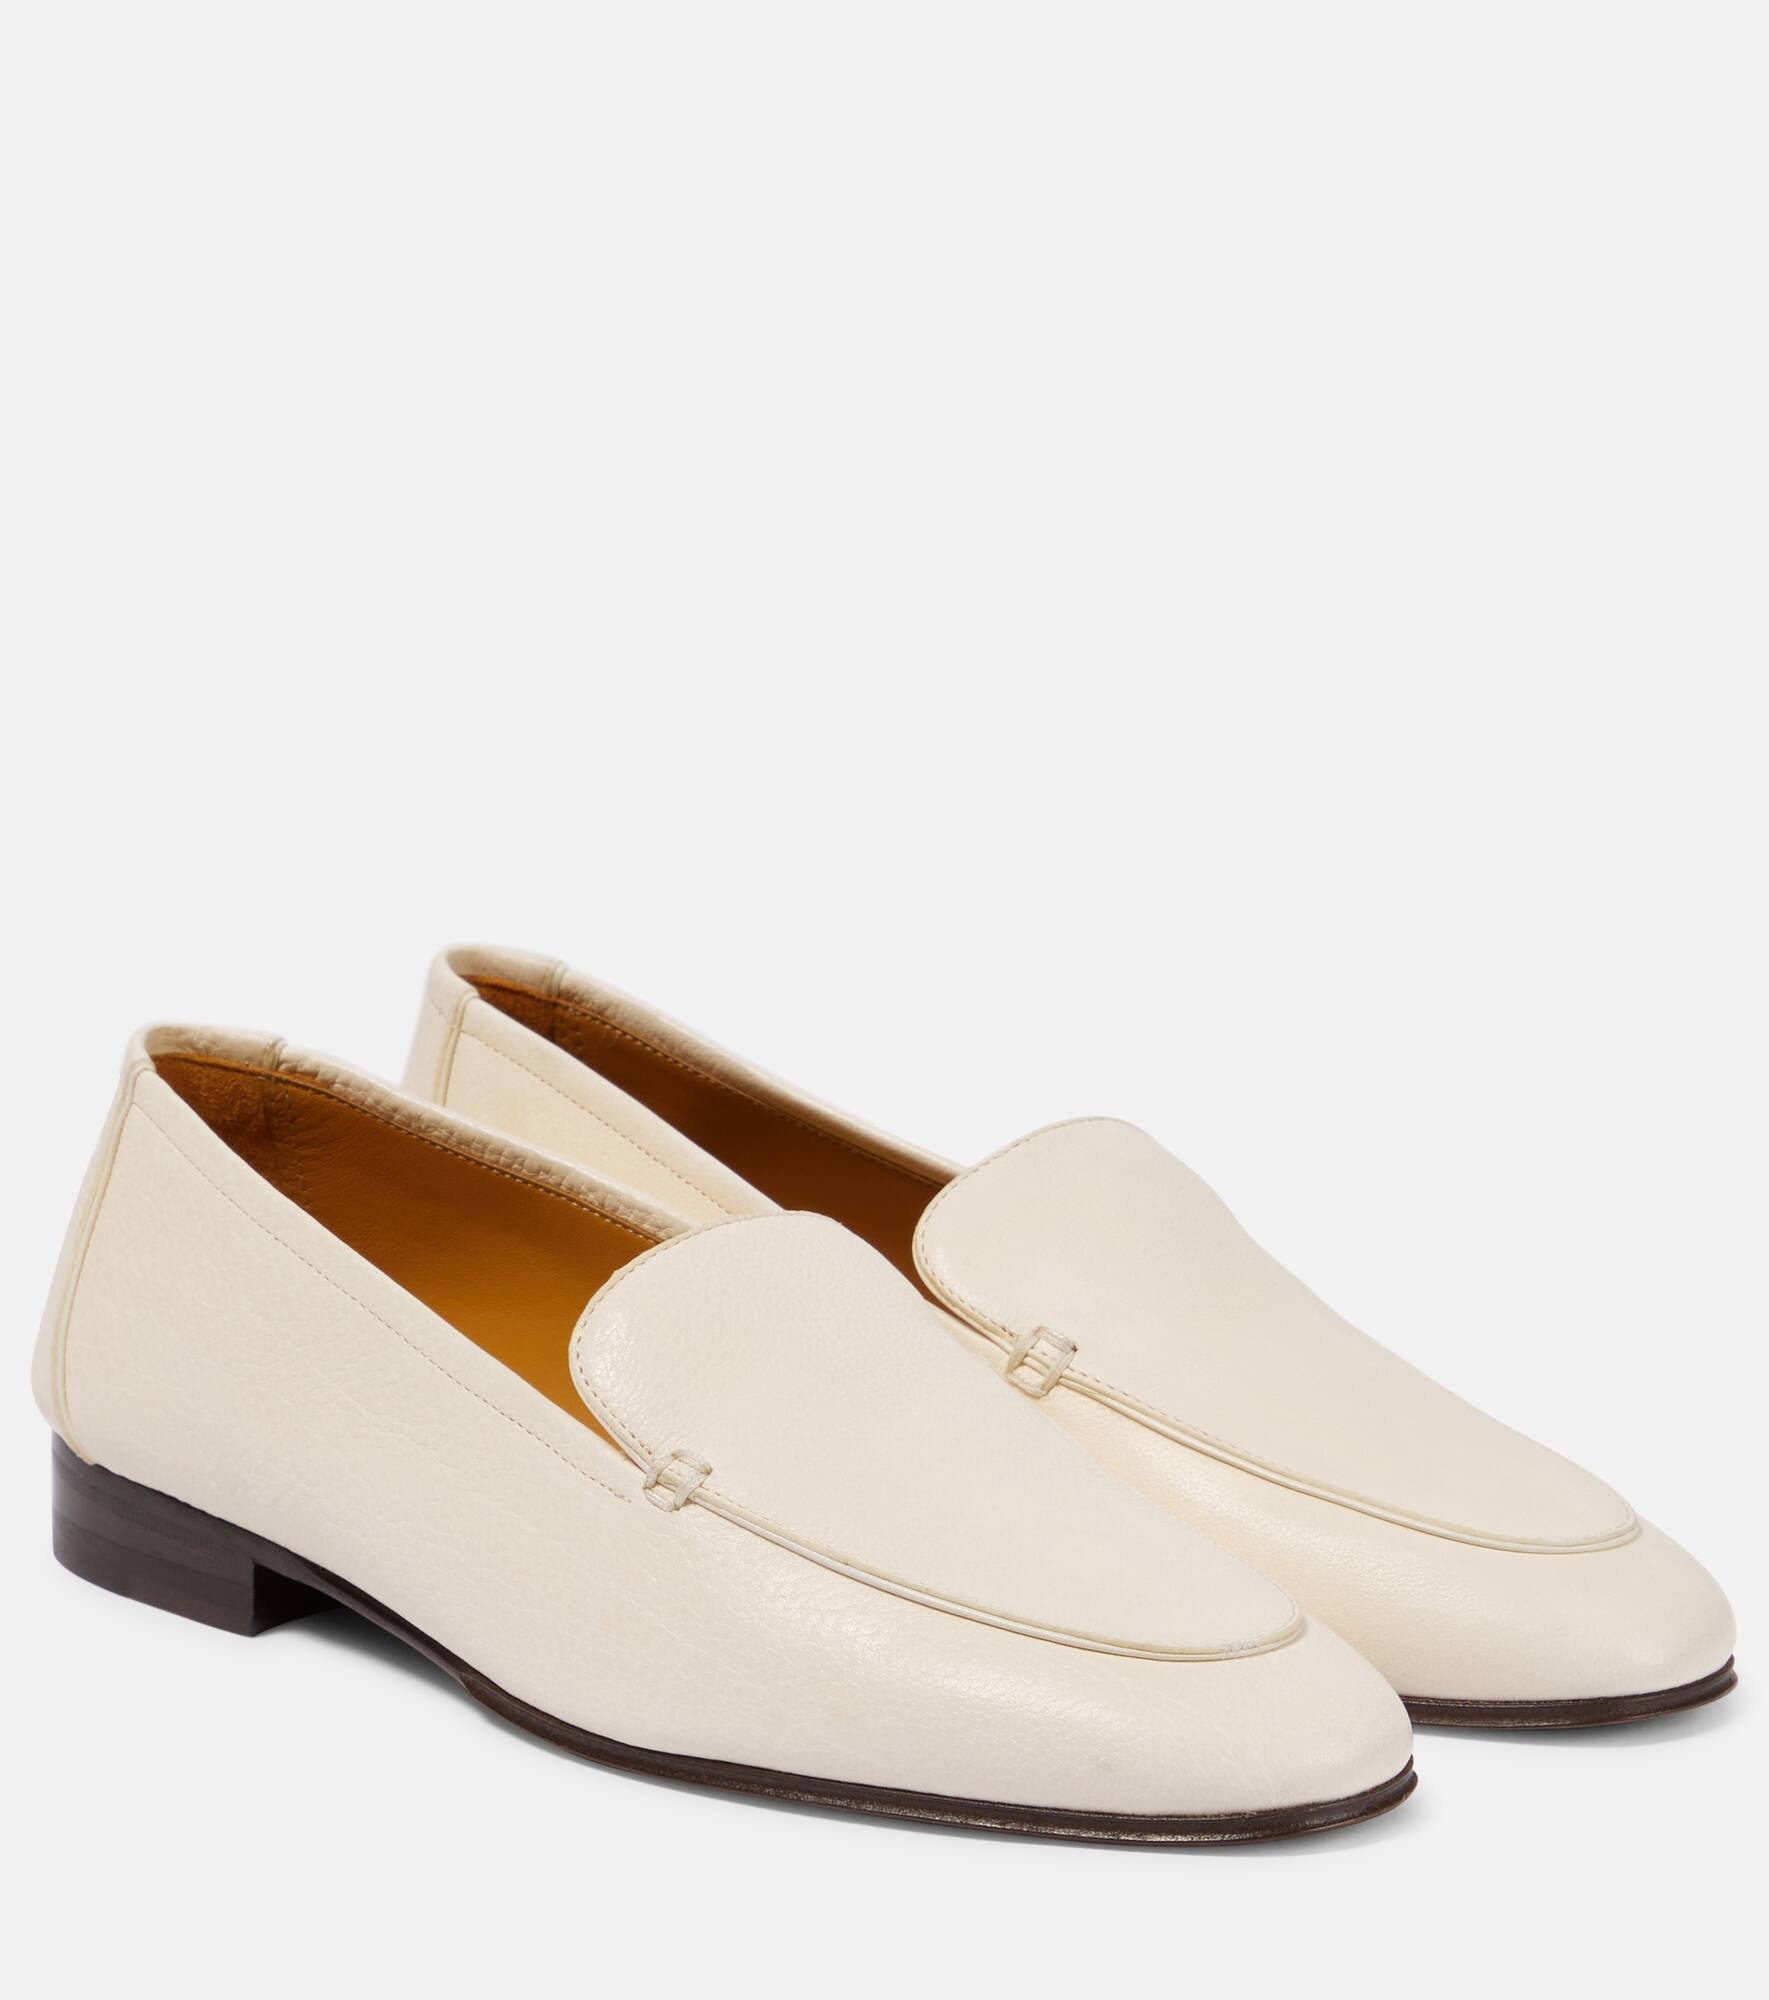 Adam leather loafers - 1